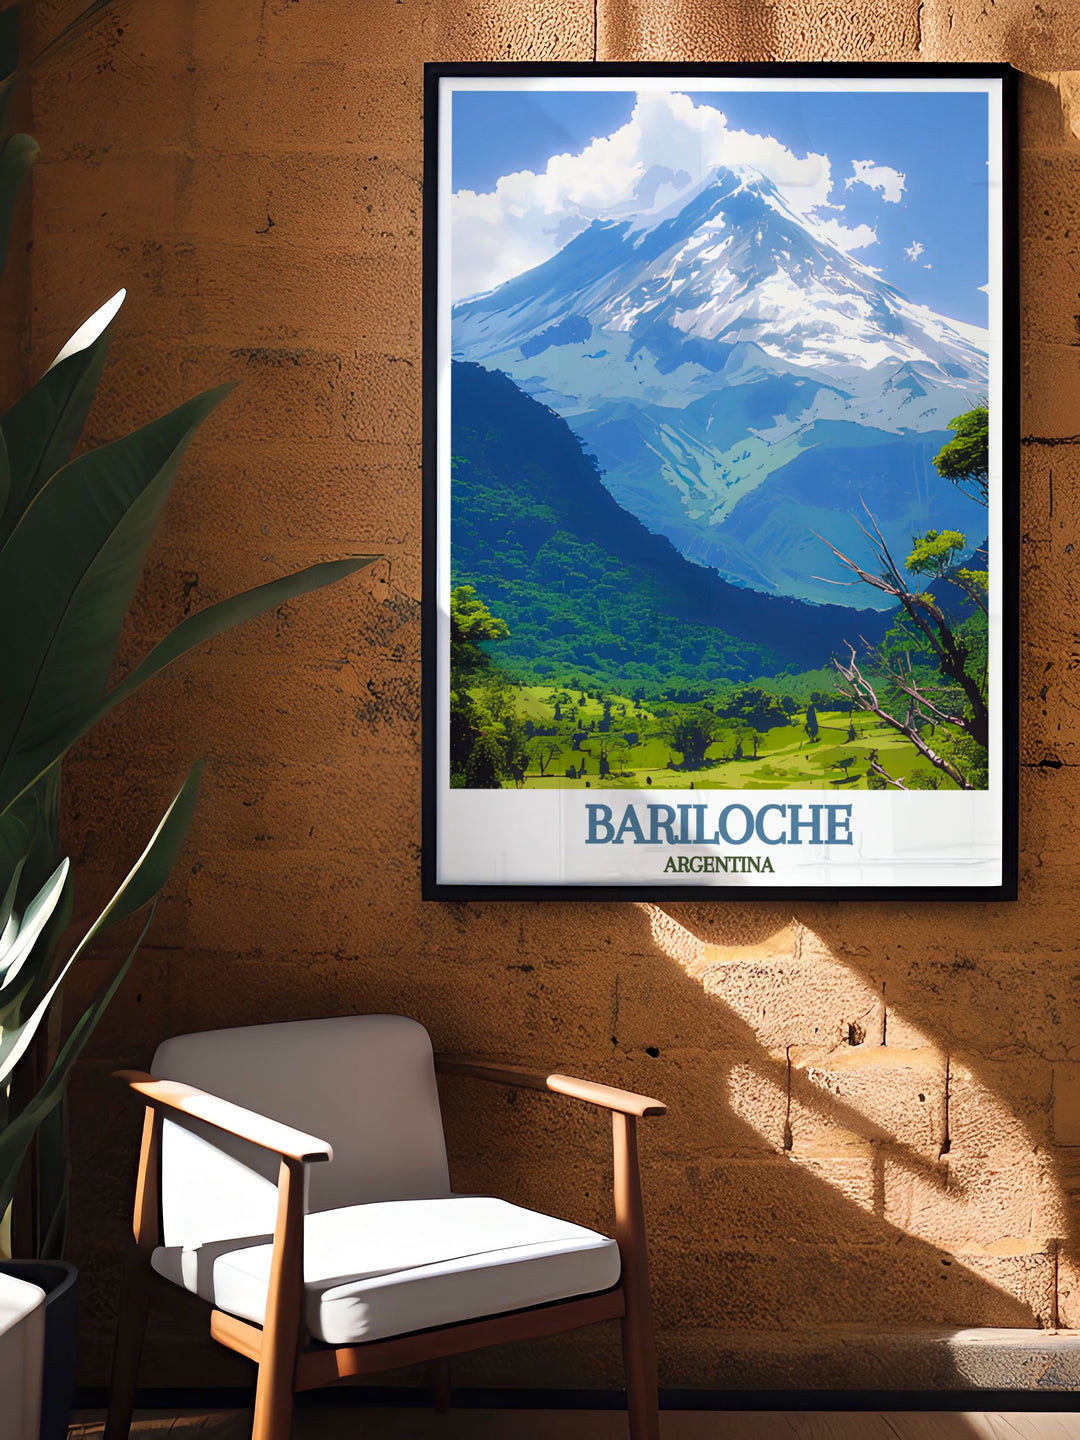 Elegant Argentina wall art featuring Bariloches Tronador Volcano and lively San Carlos de Bariloche, highlighting the regions natural and cultural beauty. Perfect for adding a sophisticated and adventurous touch to any room.